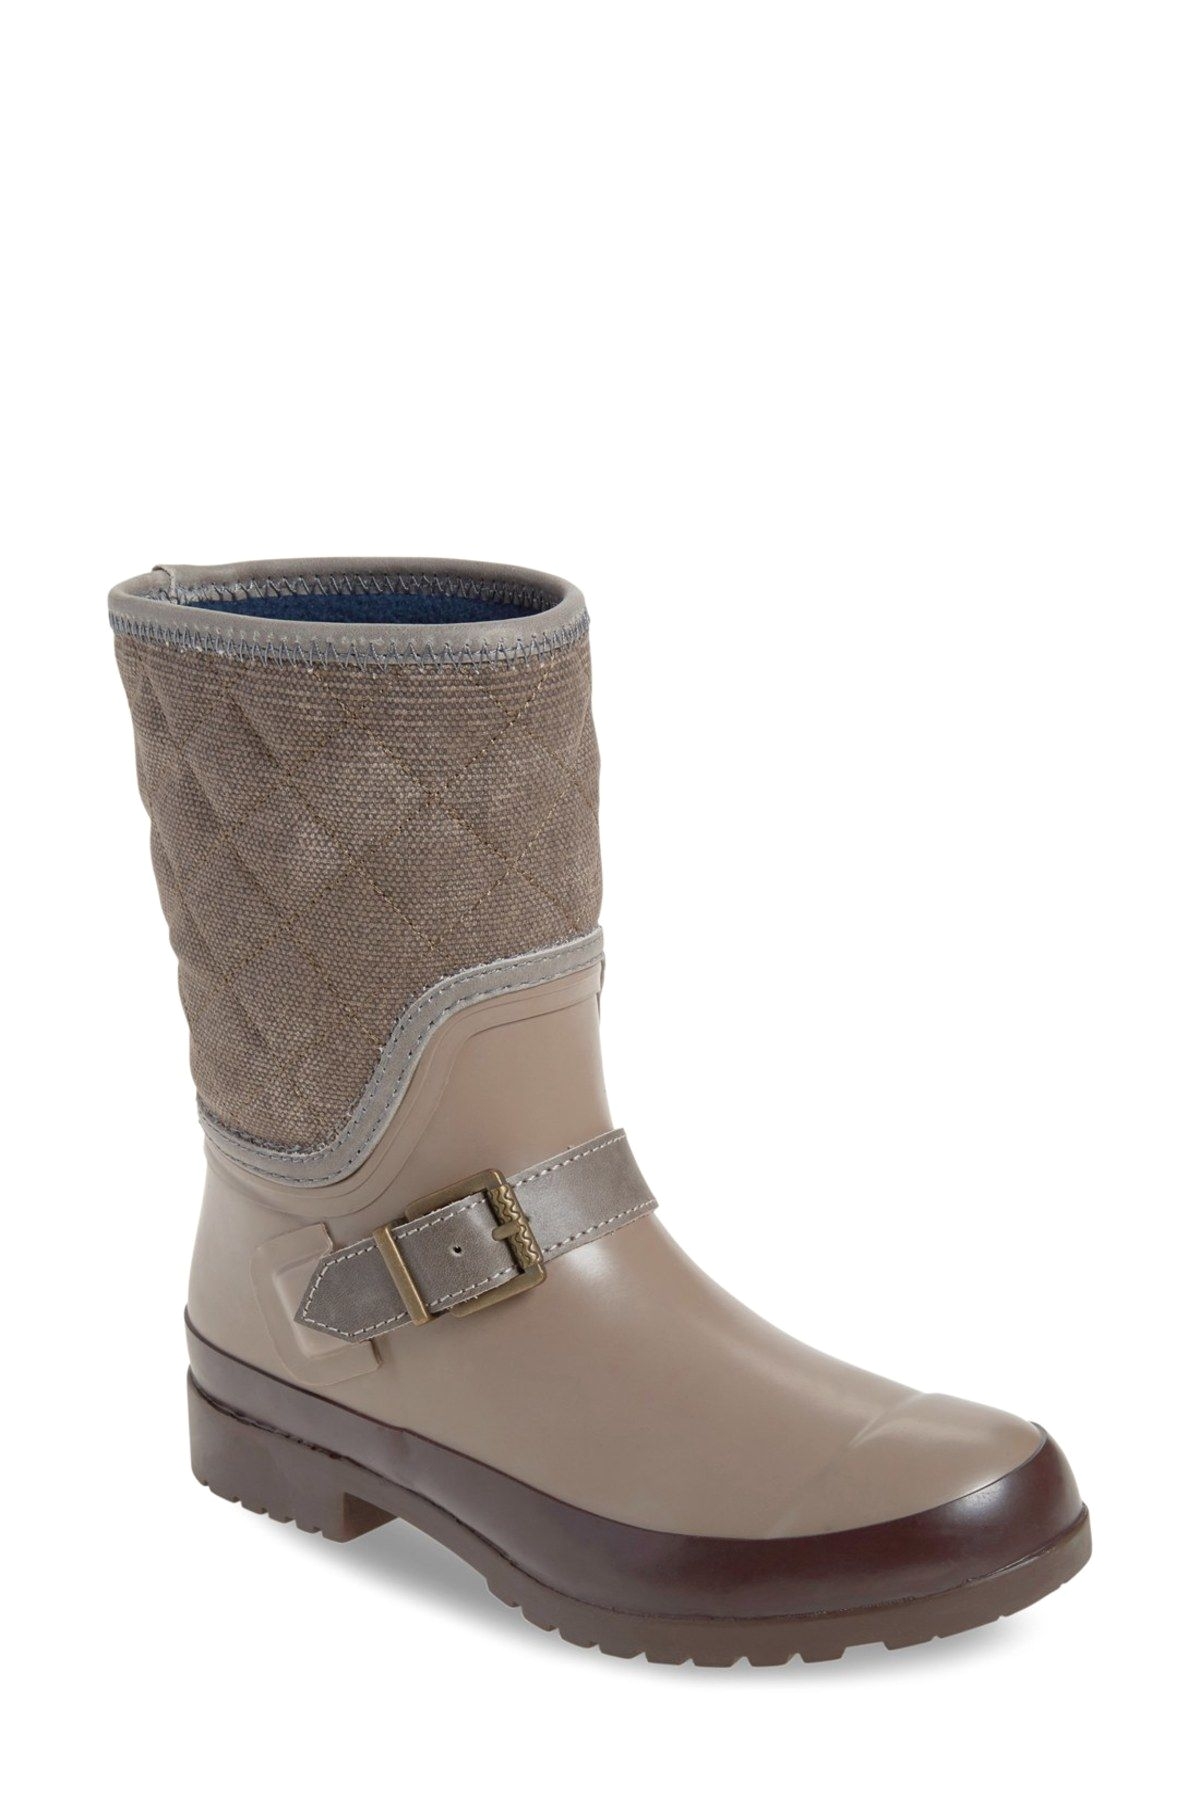 walker canvas quilt rain boot by sperry on nordstrom rack